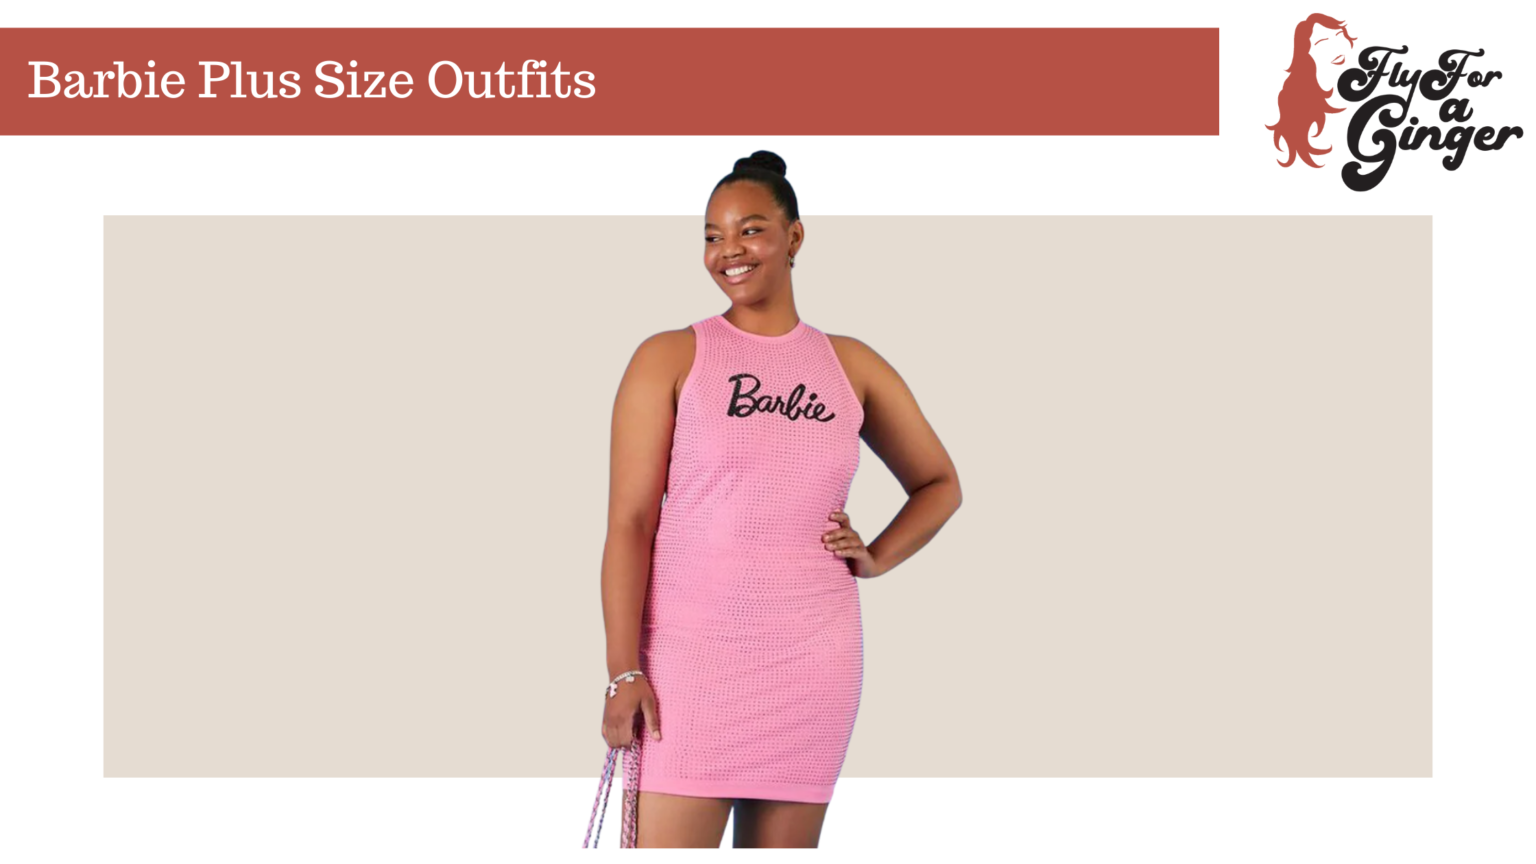 Barbie Plus Size Outfits // Where to Find Curvy Barbie Clothes